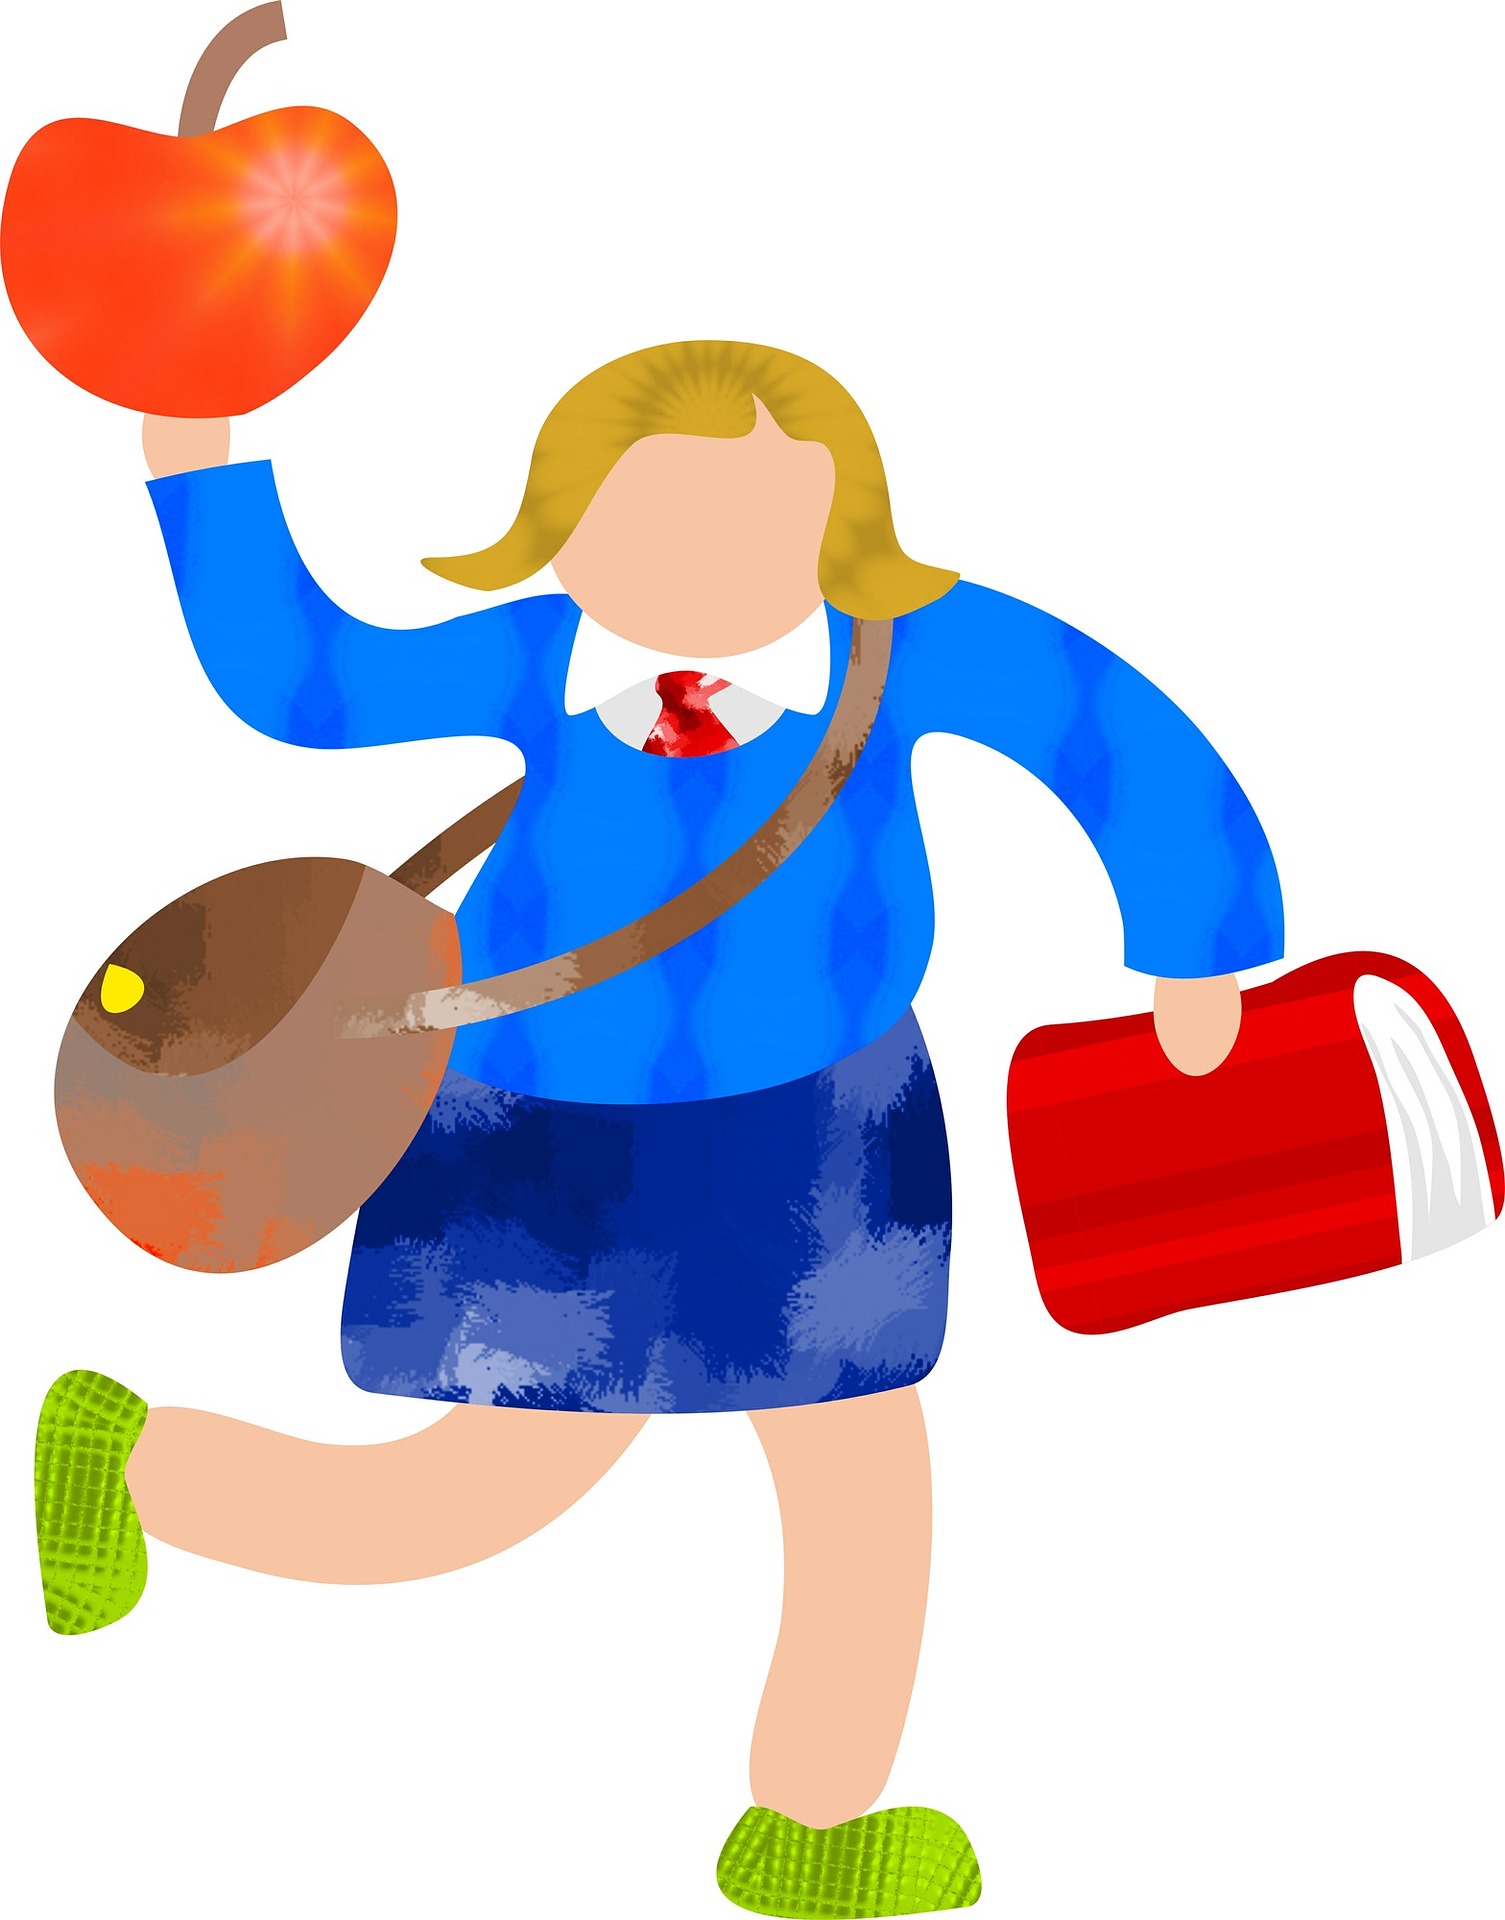 drawing of a child with blond hair in school uniform holding a red apple and a red book